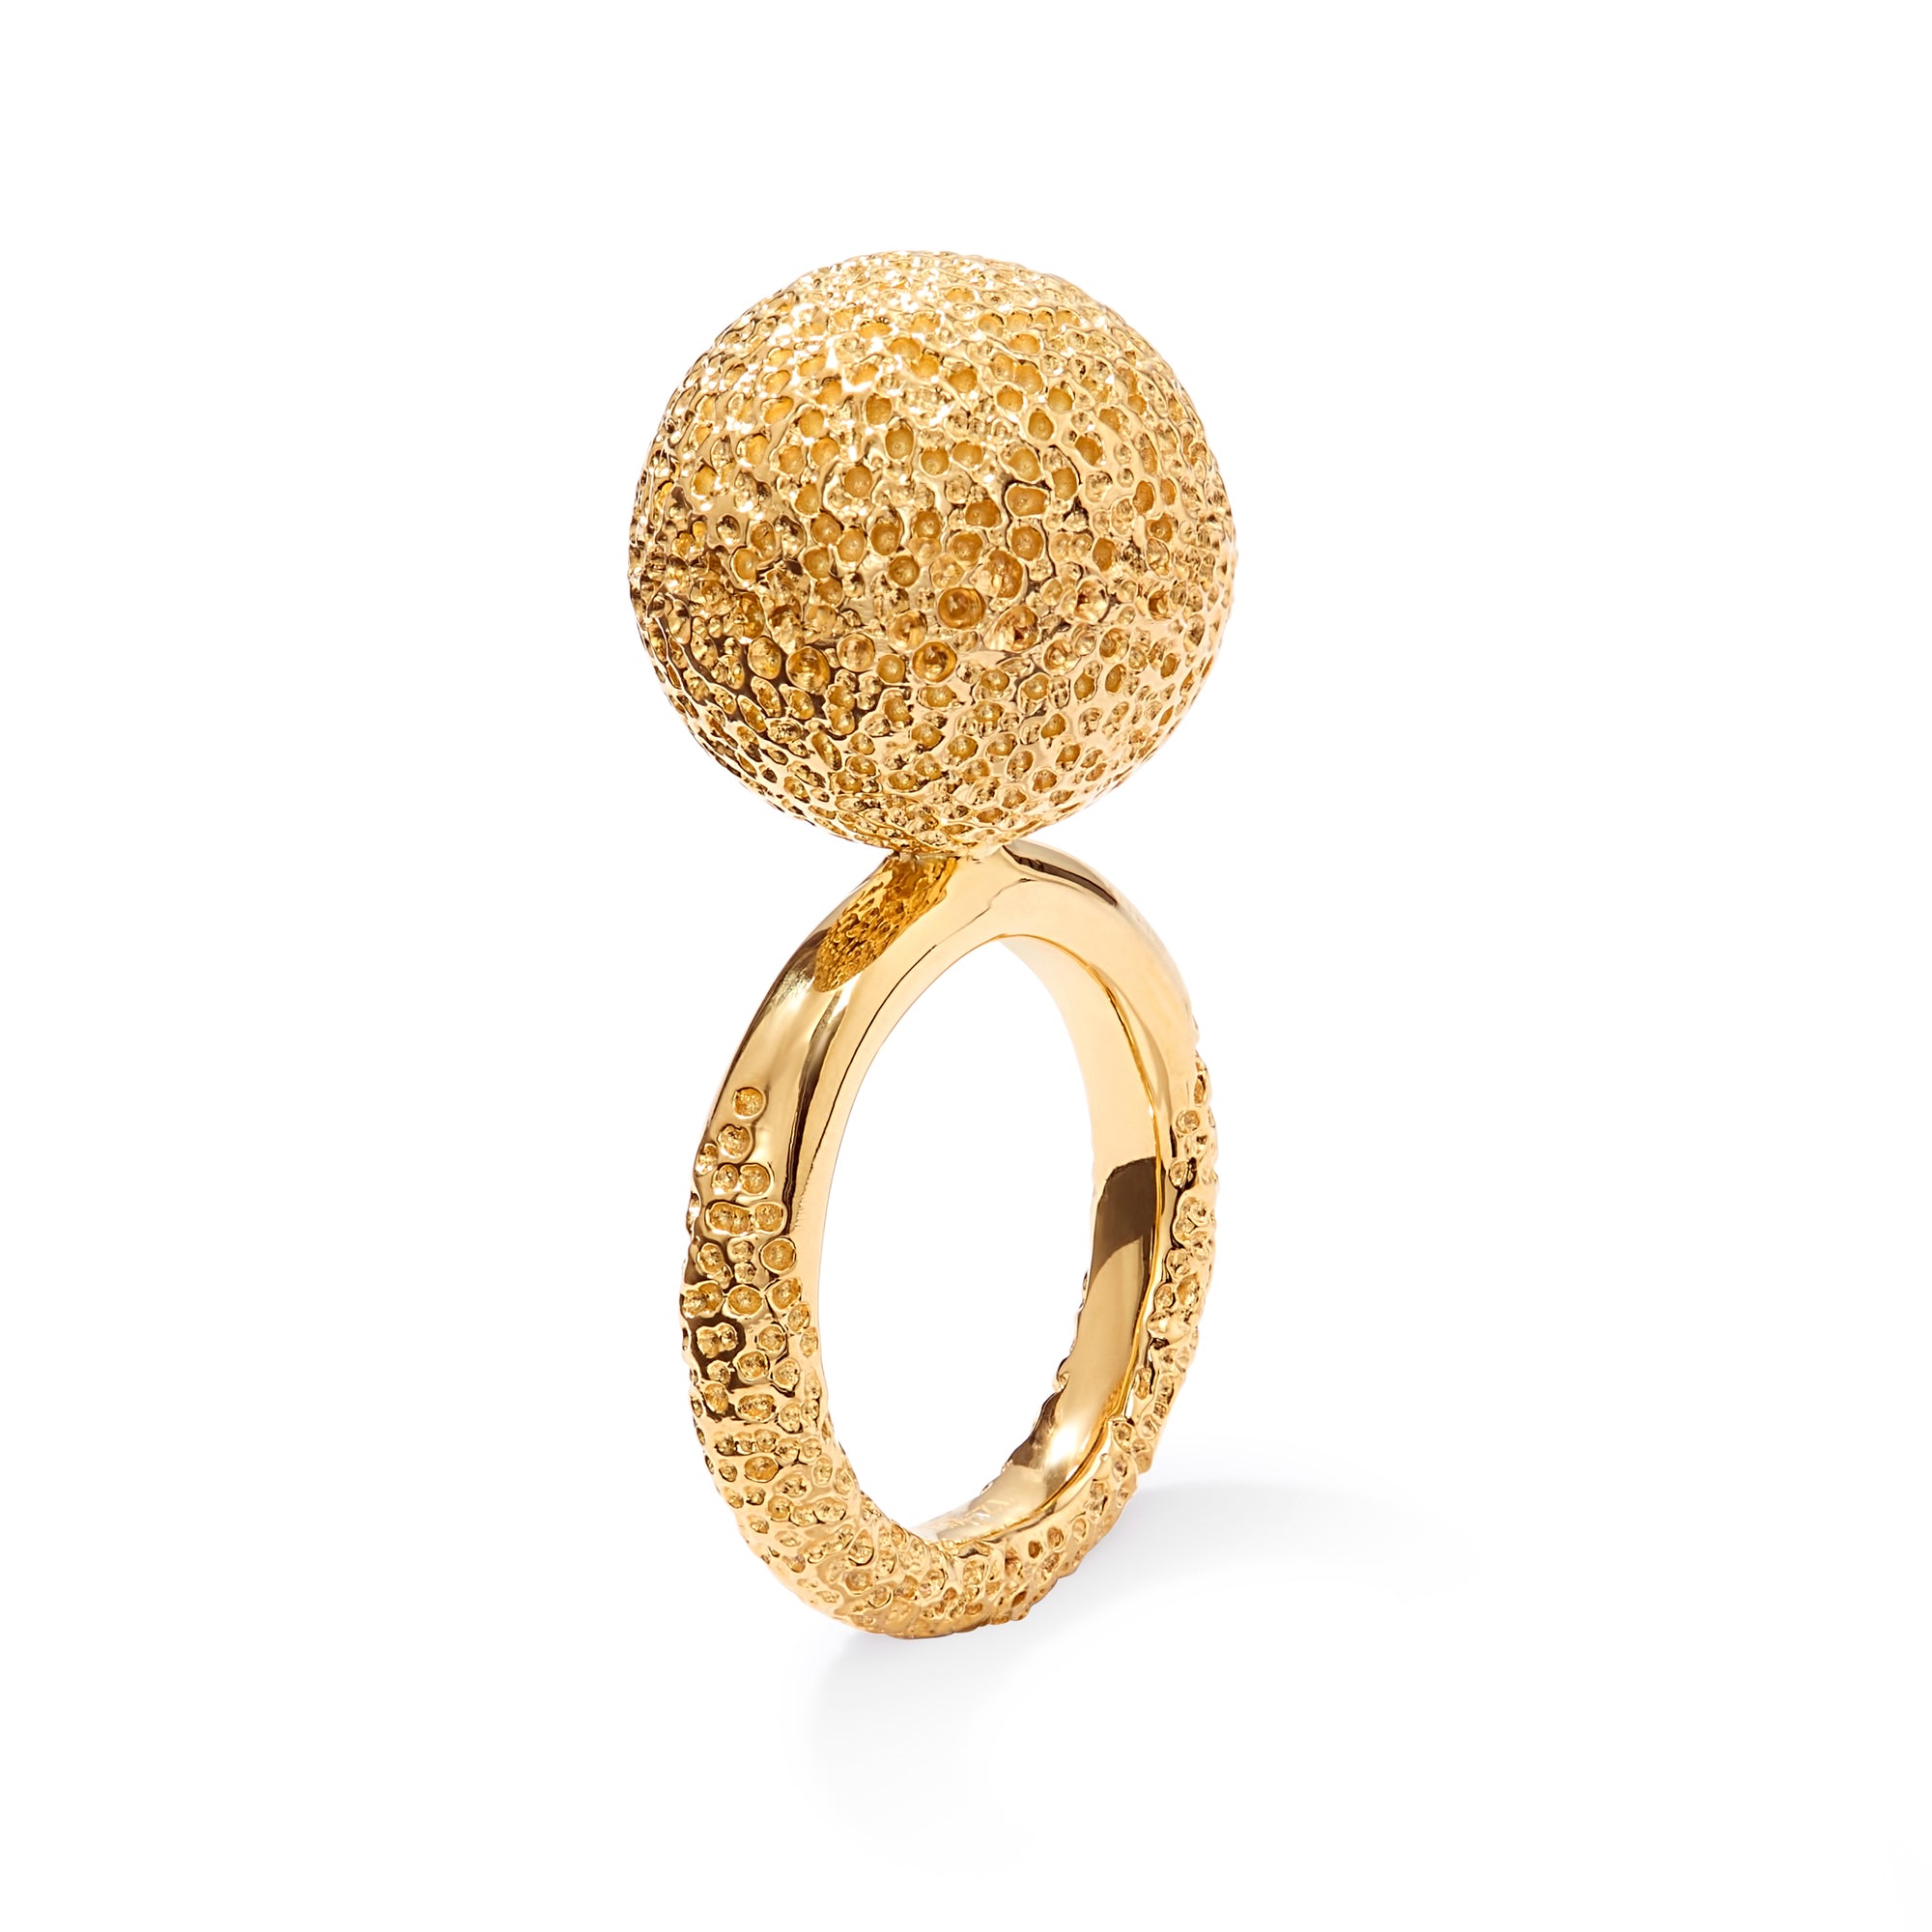 The SPHERE Ring Gold Plated